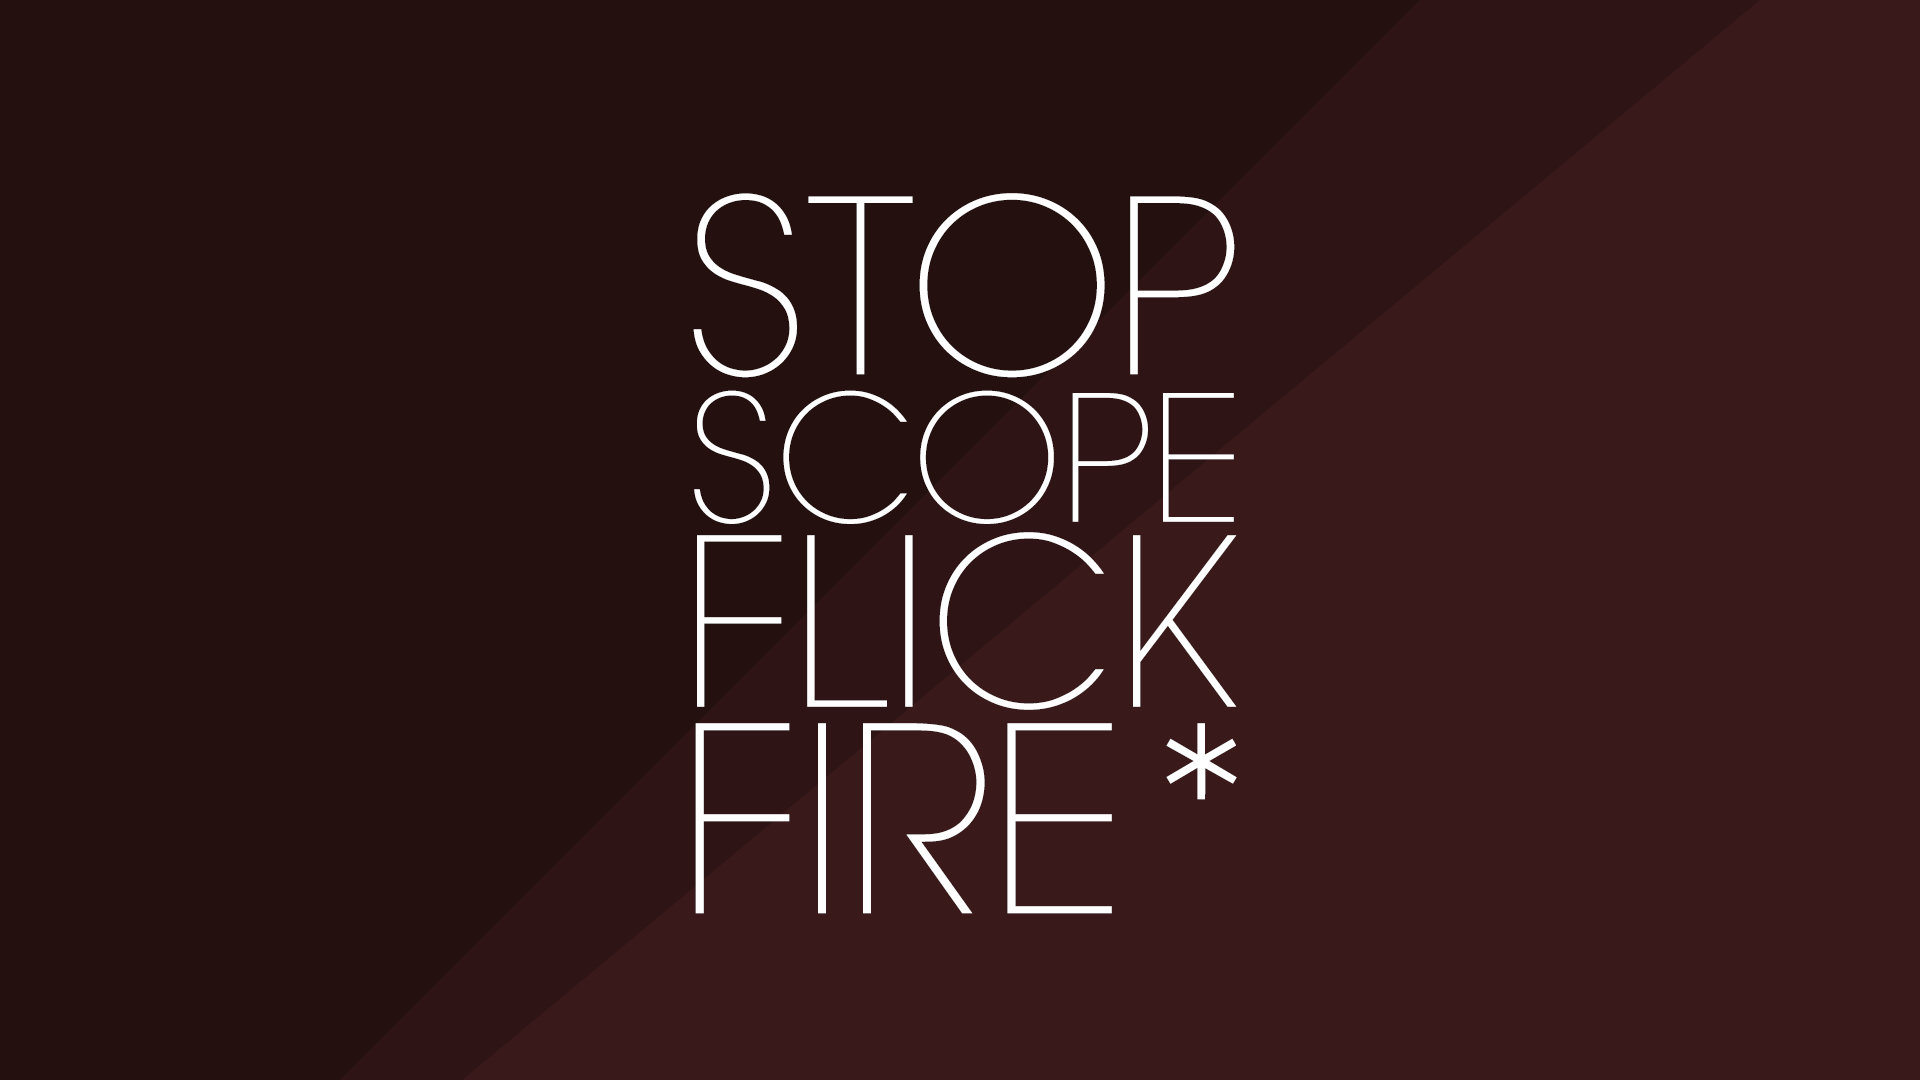 Stop. Scope. Flick. Fire*. CS:GO Wallpaper and Background